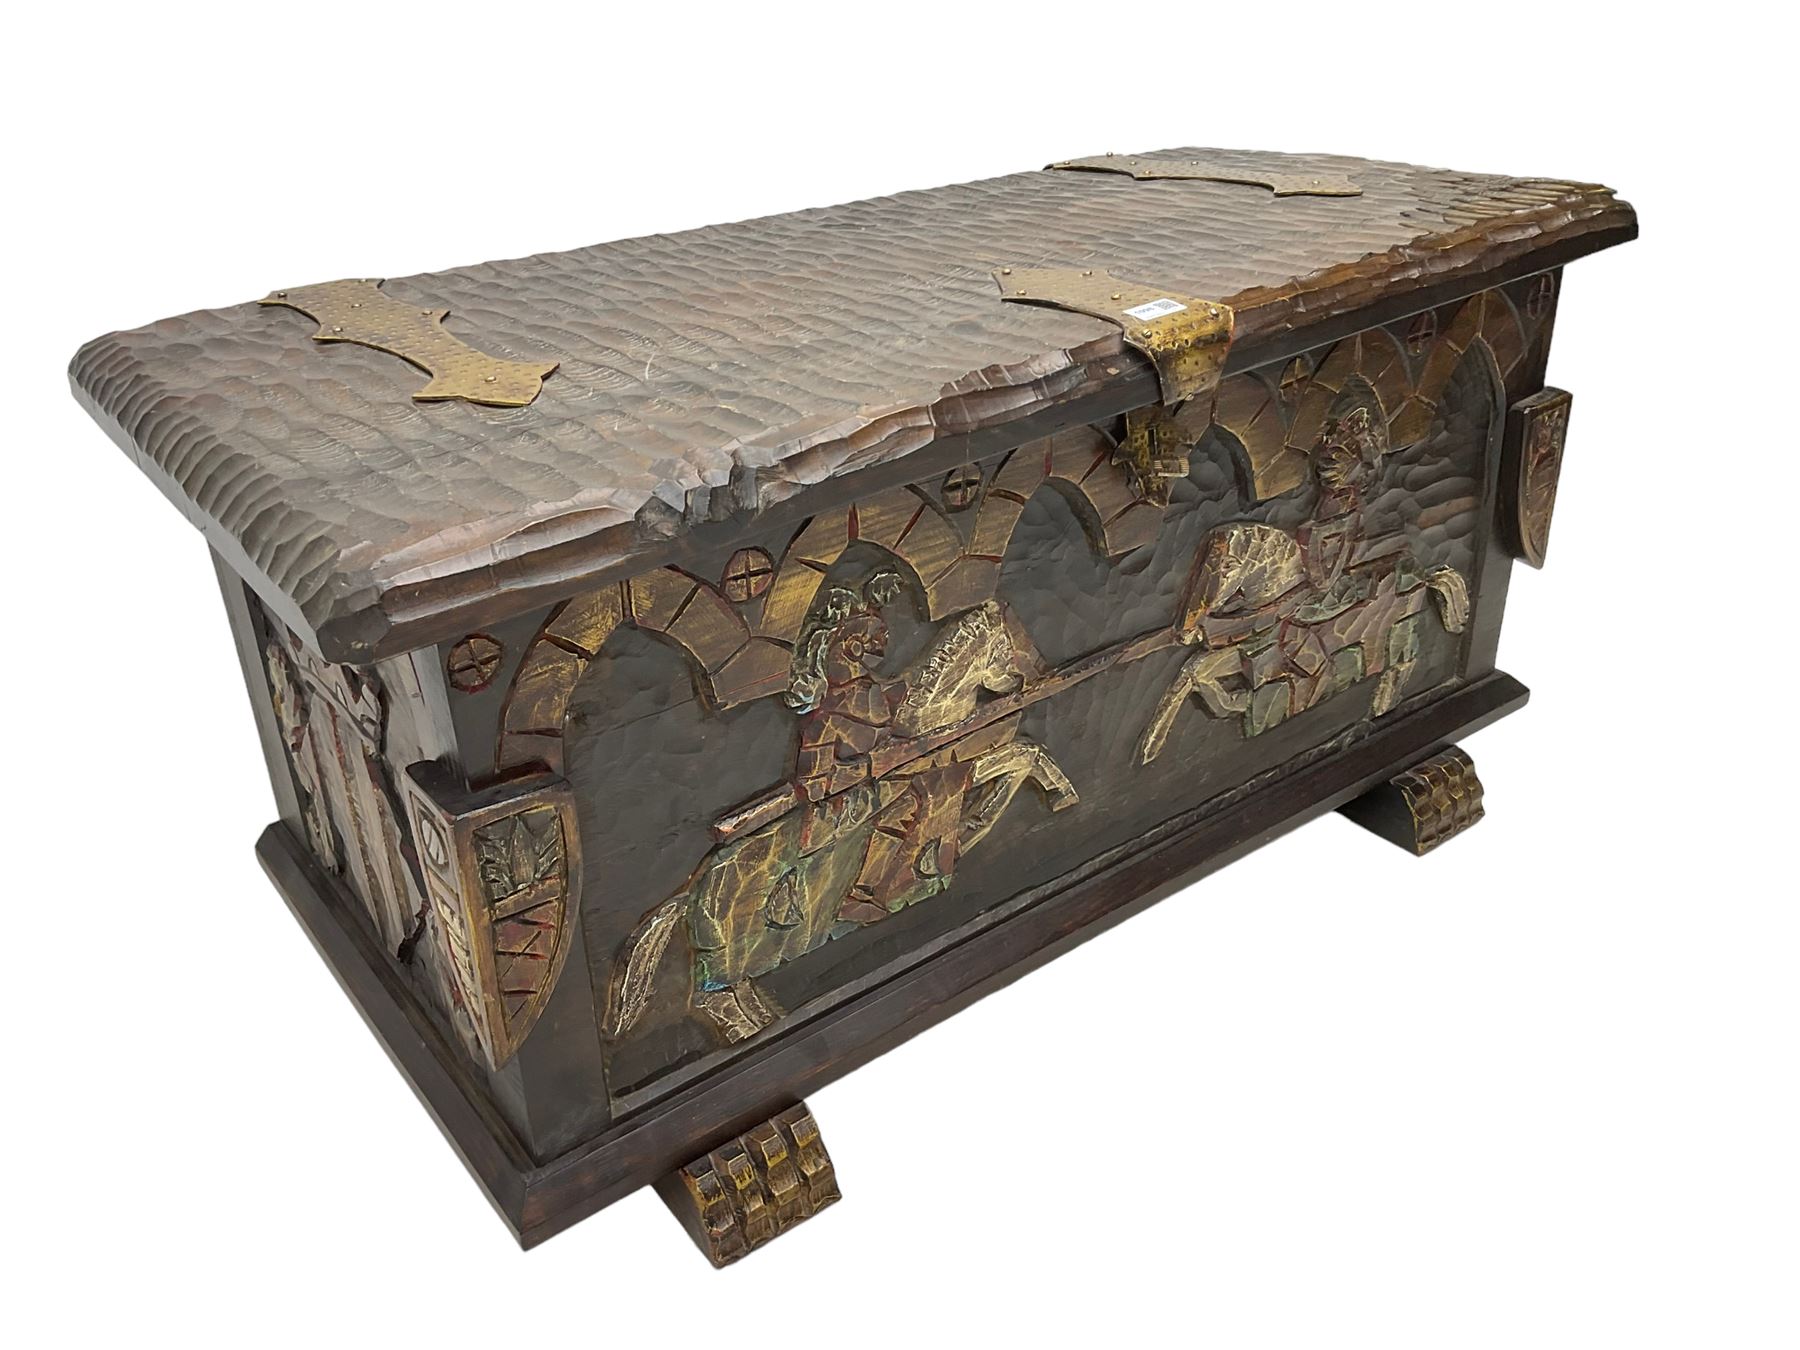 Carved wooden blanket chest - Image 5 of 9